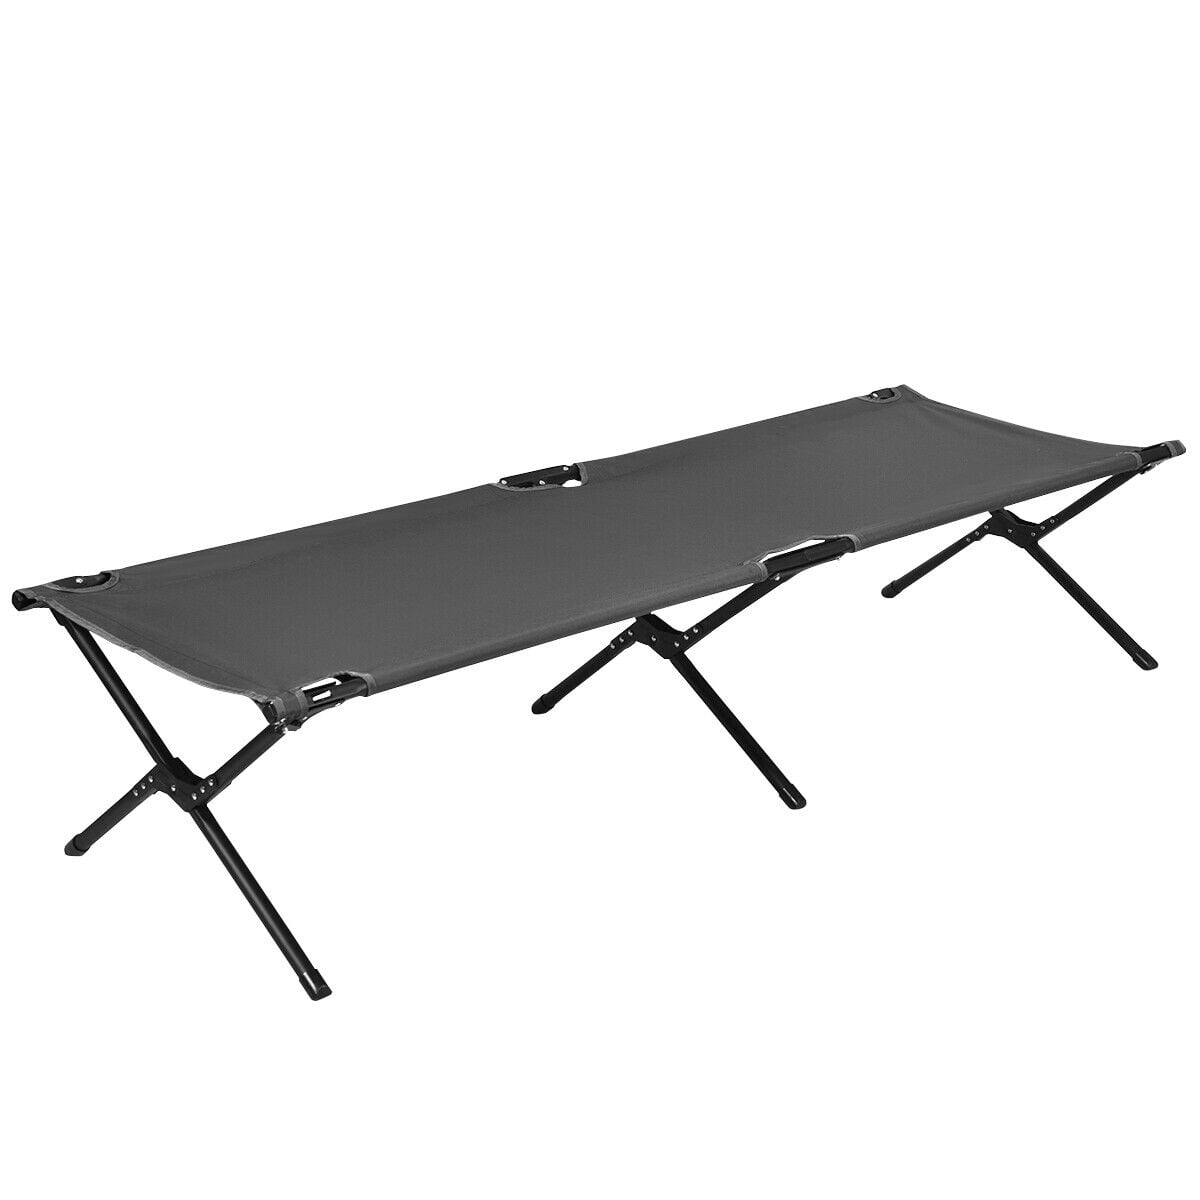 Gymax Folding Camping Cot & Bed Heavy-Duty for Adults Kids w/ Carrying Bag 300LBS Grey | Walmart ...